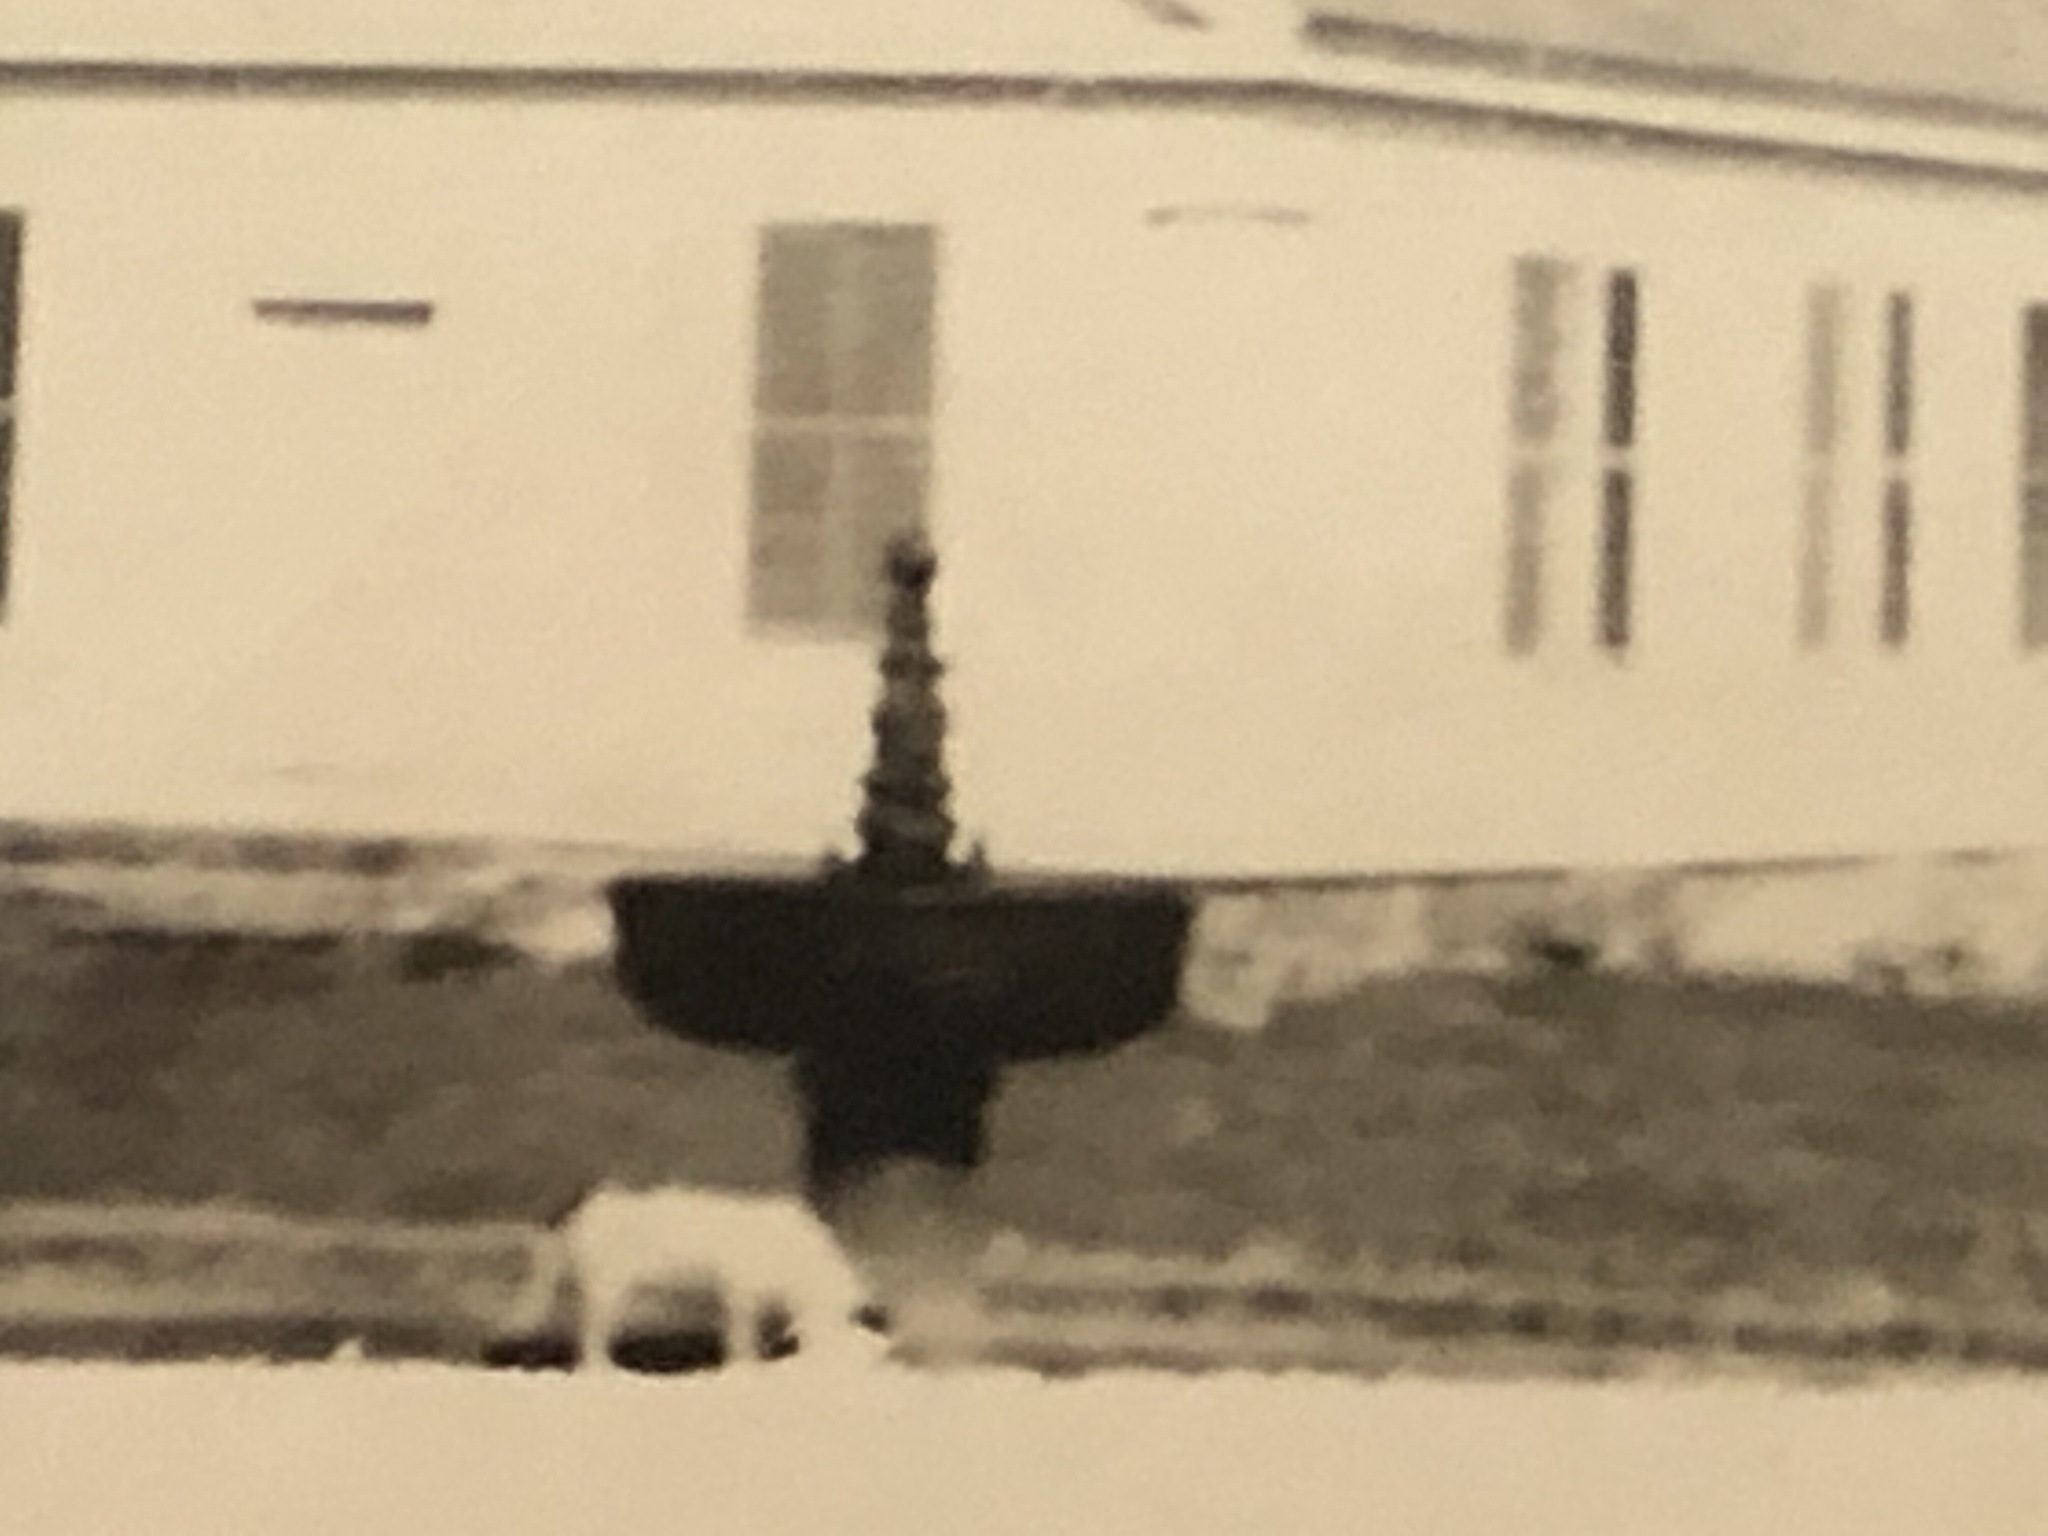 Image of dog drinking from Captain Ball's Fountain, detail view taken from larger image.